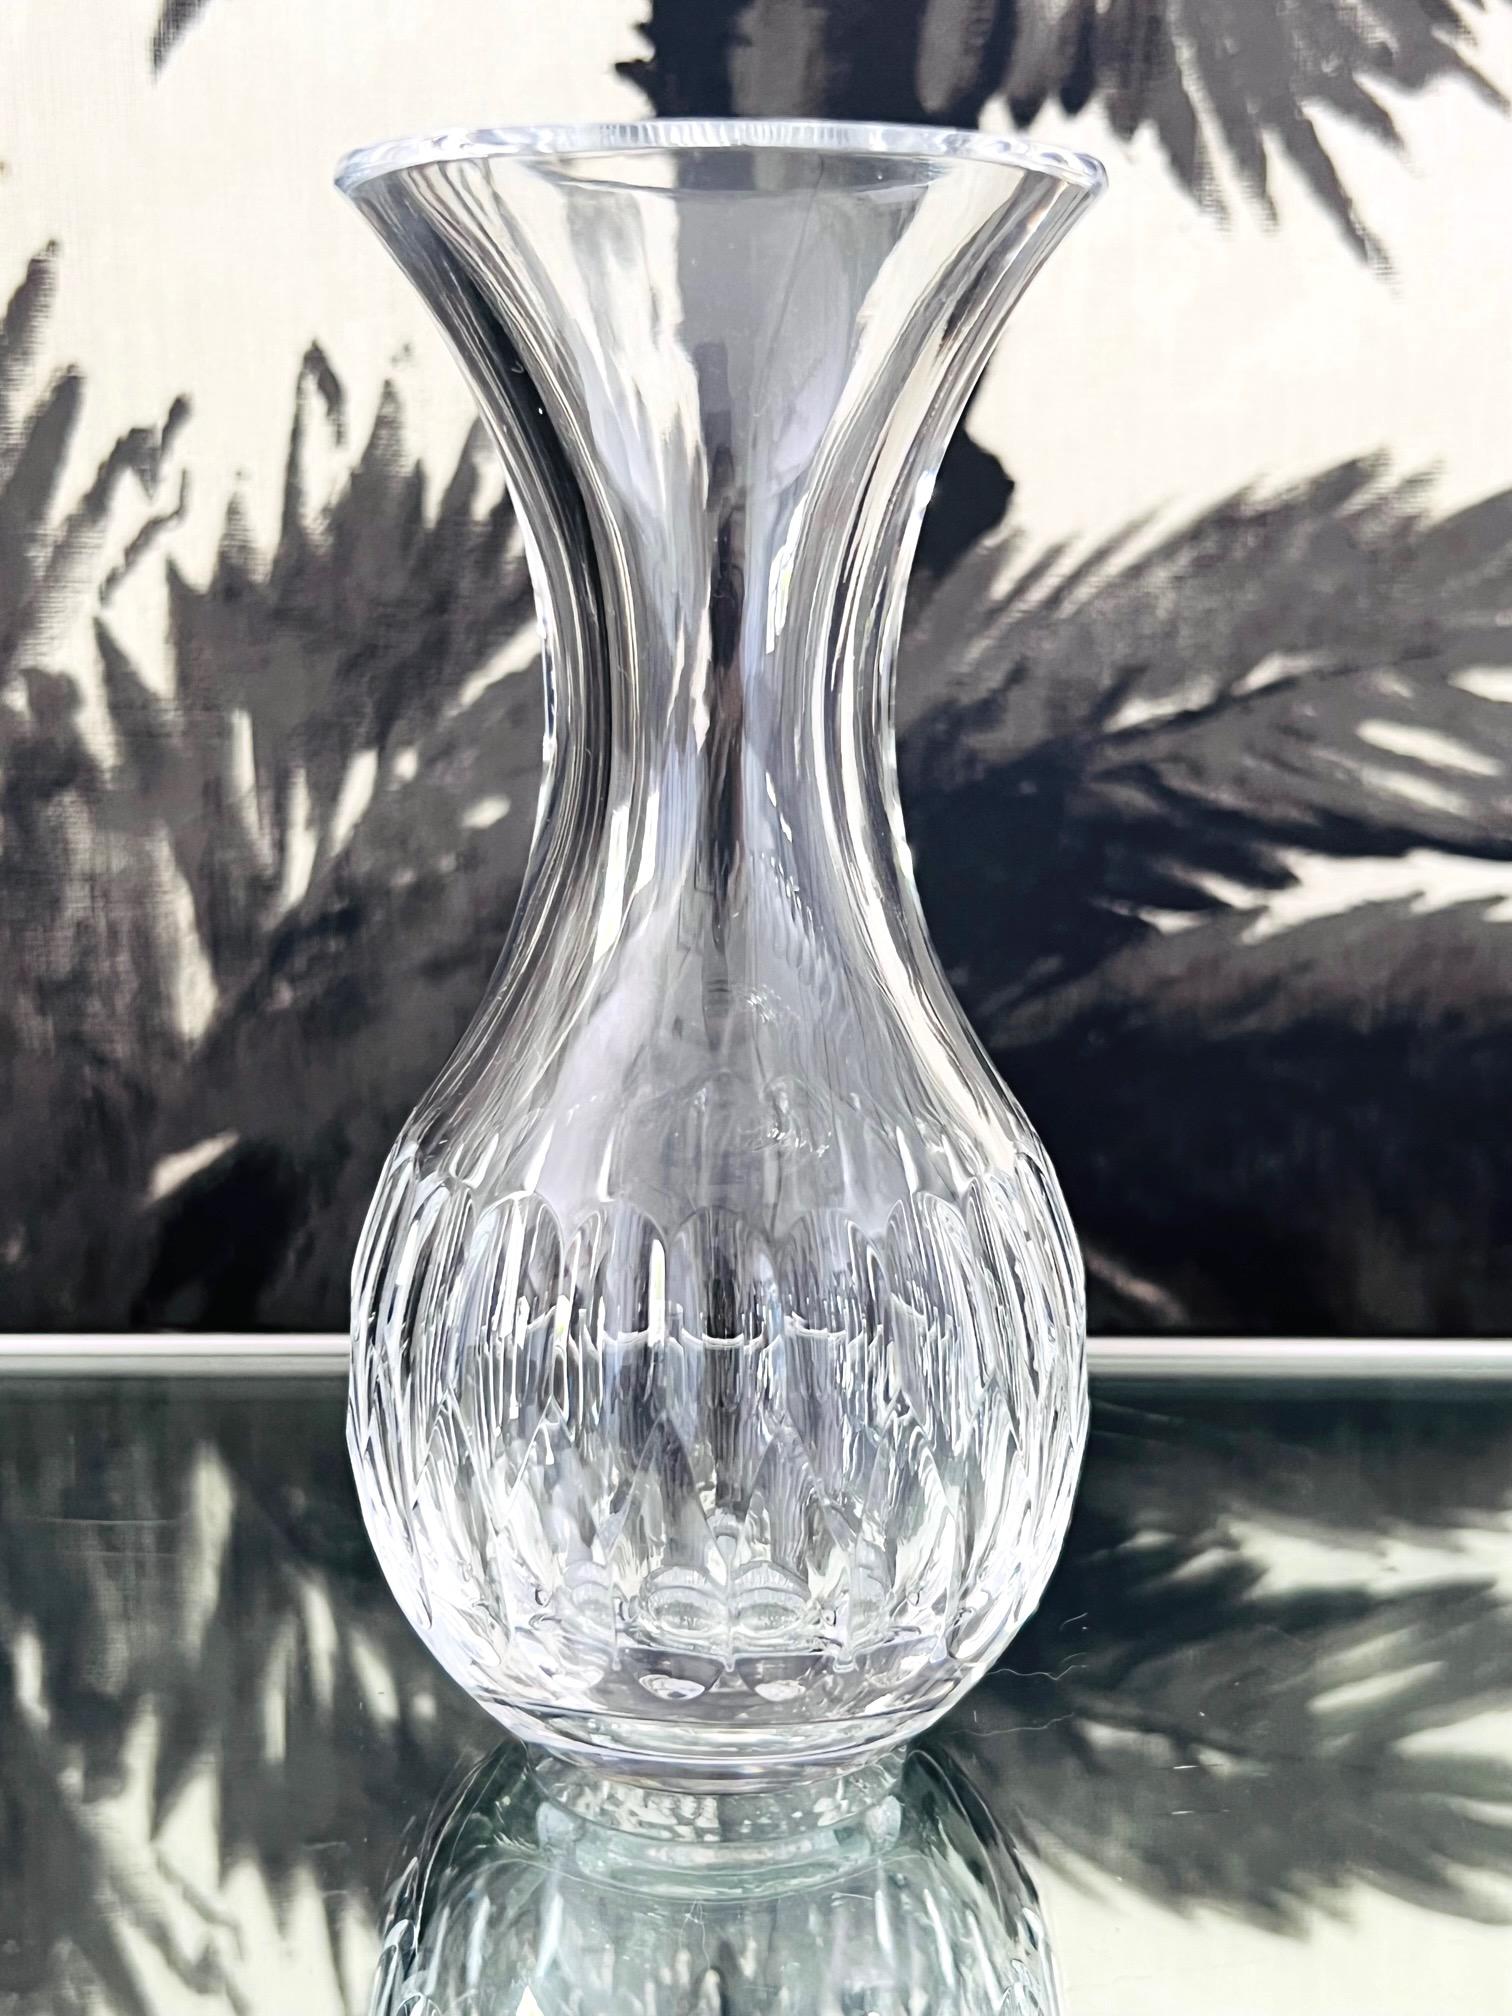 1980's Waterford crystal small carafe and decanter. Mouth blown and crafted by hand, the urn shaped carafe has an elongated stem with a bulbous base featuring faceted teardrop pattern with a geometric design. Perfect size for personal use,